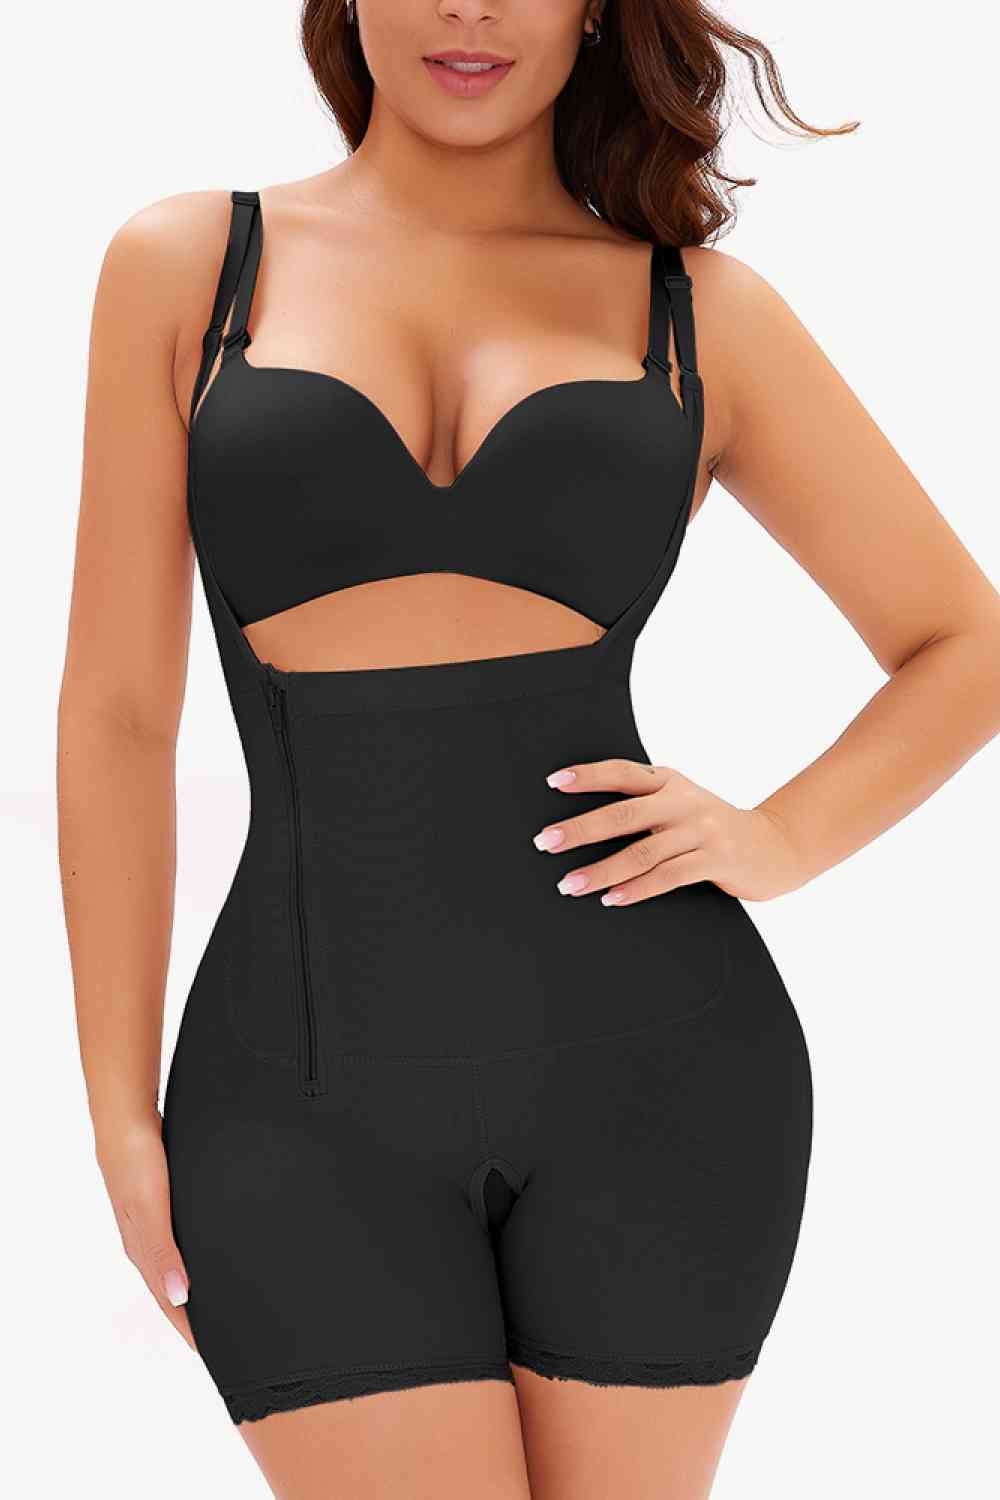 Full Size Side Zipper Under-Bust Shaping Bodysuit -  - Wild Willows Boutique - Massapequa, NY, affordable and fashionable clothing for women of all ages. Bottoms, tops, dresses, intimates, outerwear, sweater, shoes, accessories, jewelry, active wear, and more // Wild Willow Boutique.